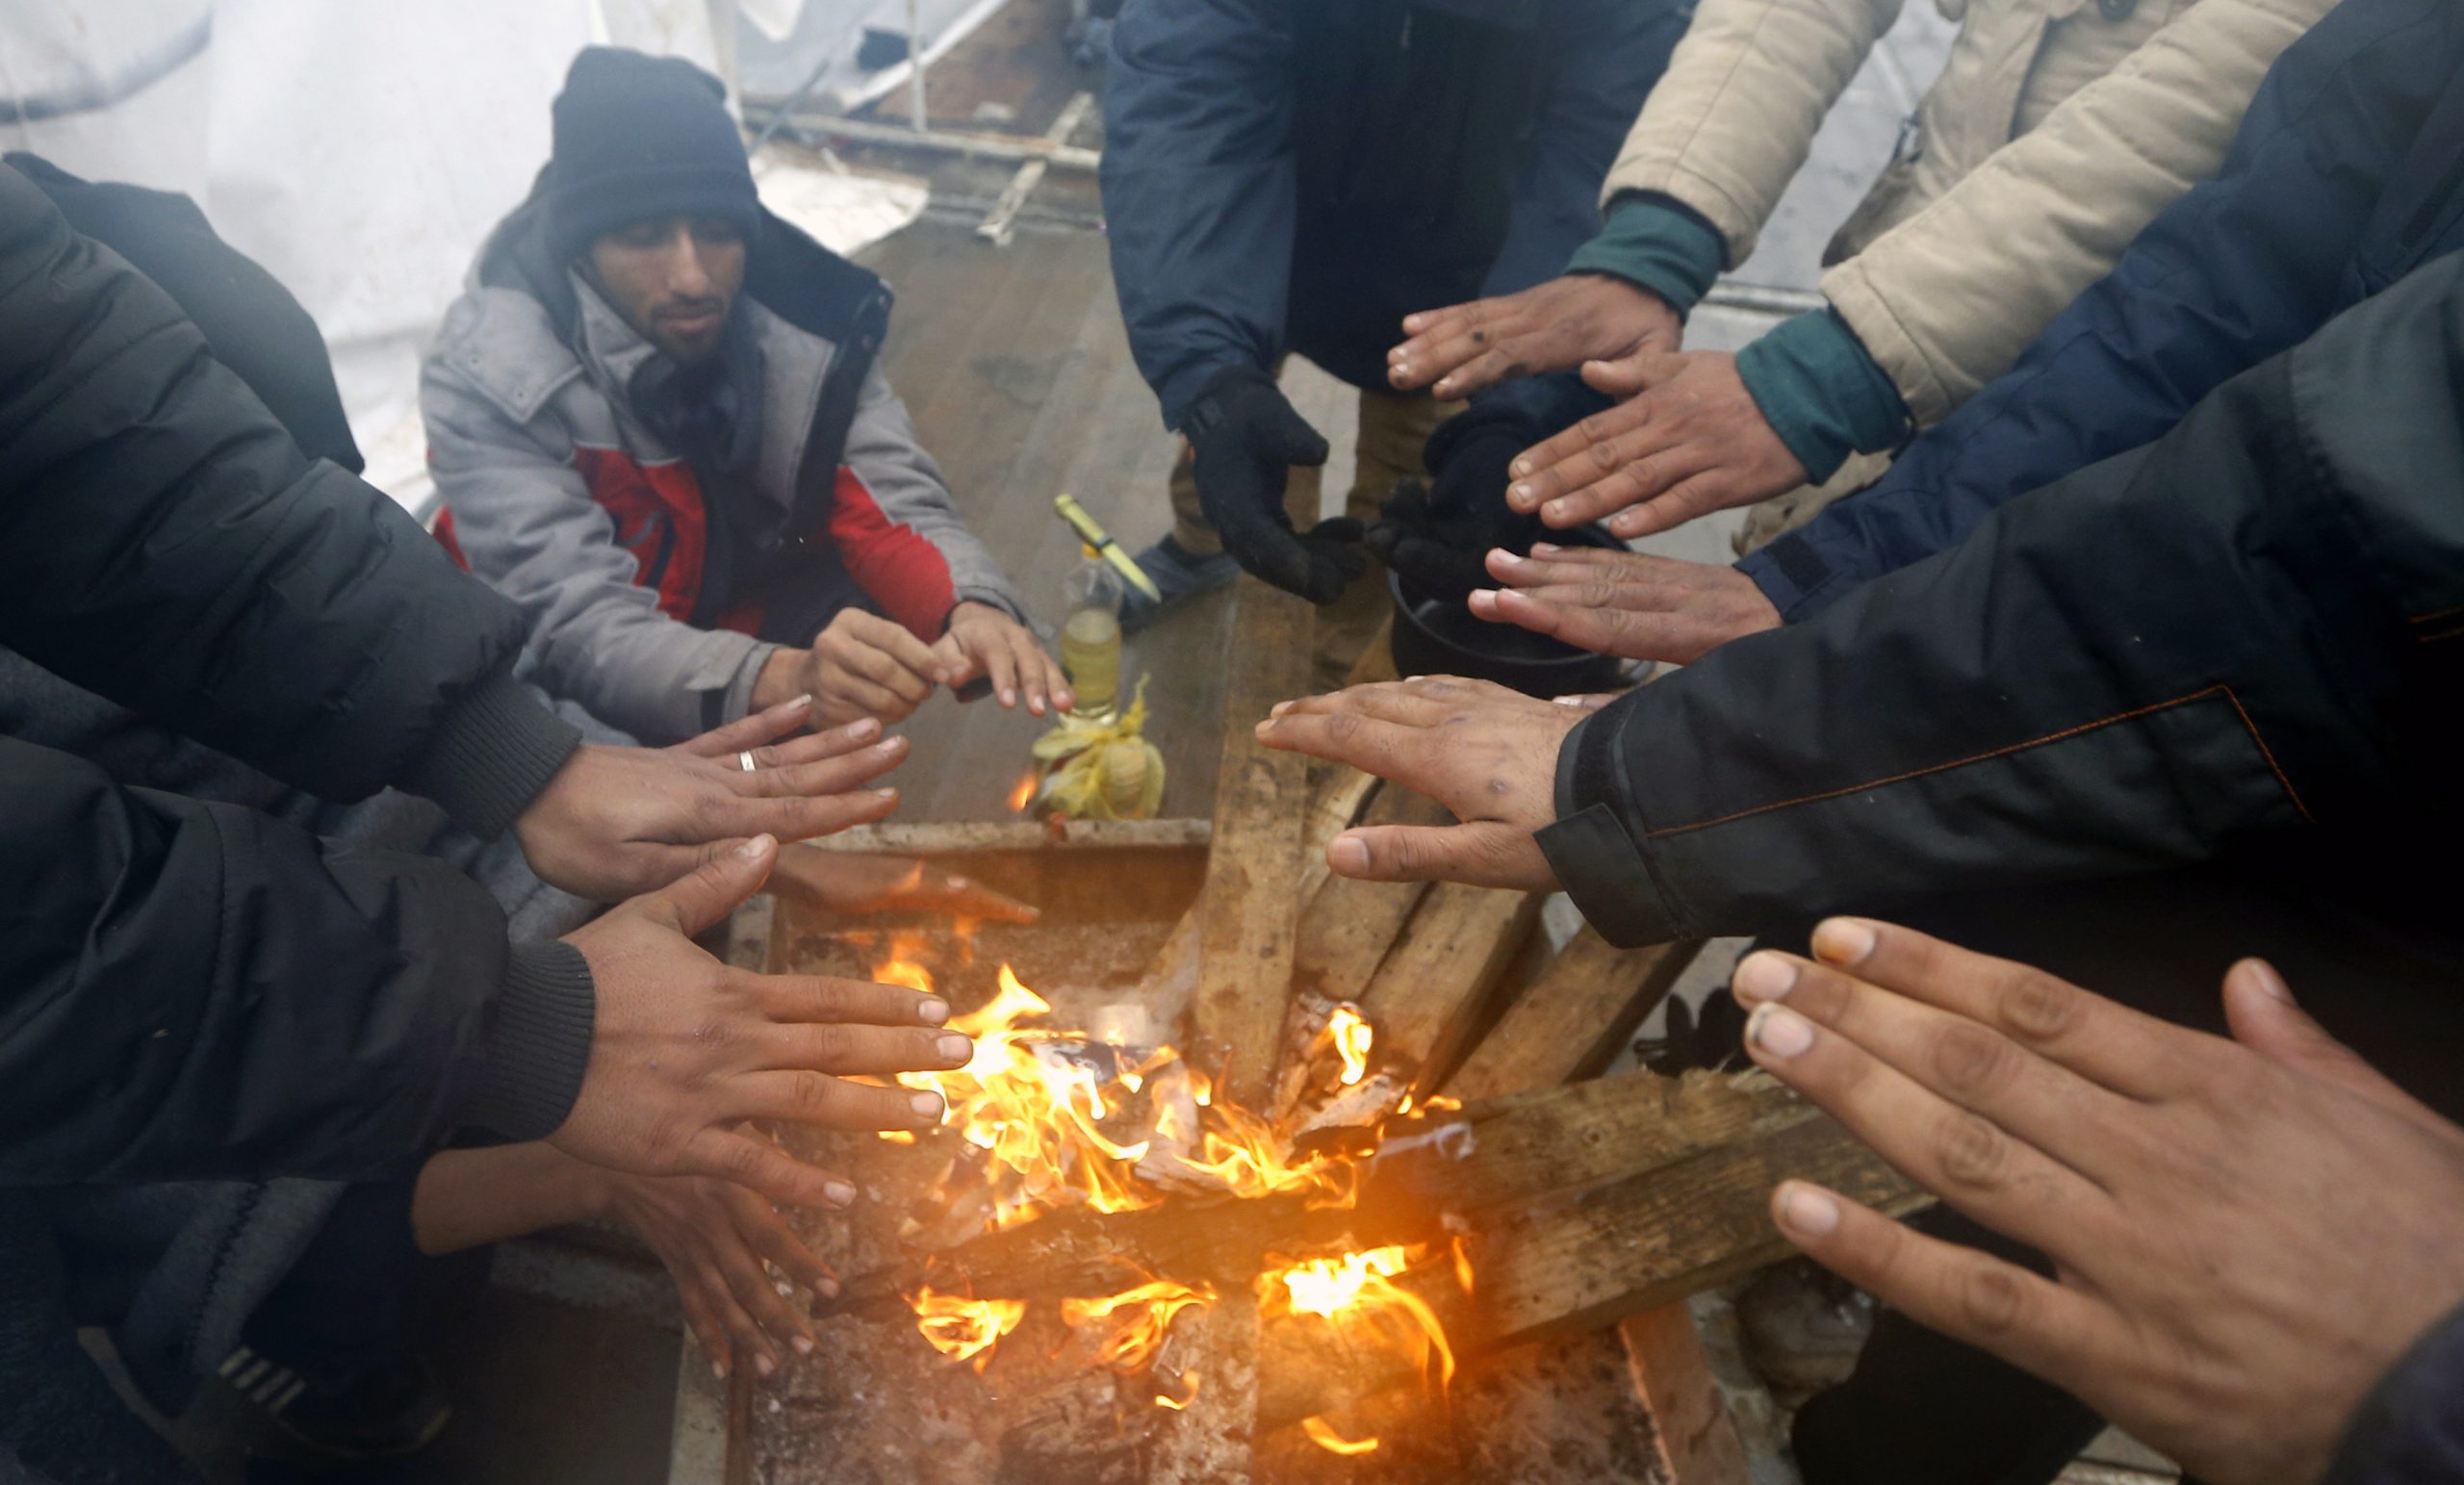 epaselect epa08914523 Migrants warm themselves by a campfire during a winter day at the Lipa refugee camp outside Bihac, Bosnia and Herzegovina, 01 January 2021. Some thousand refugees at the camp were scheduled to be relocated from the burnt-down tent camp on 31 December, yet were returned to Lipa camp. A fire on 23 December destroyed most of the camp near the city of Bihac, which has already been sharply criticized by international authorities and aid groups as unsuitable for accommodating refugees and migrants.  EPA/FEHIM DEMIR